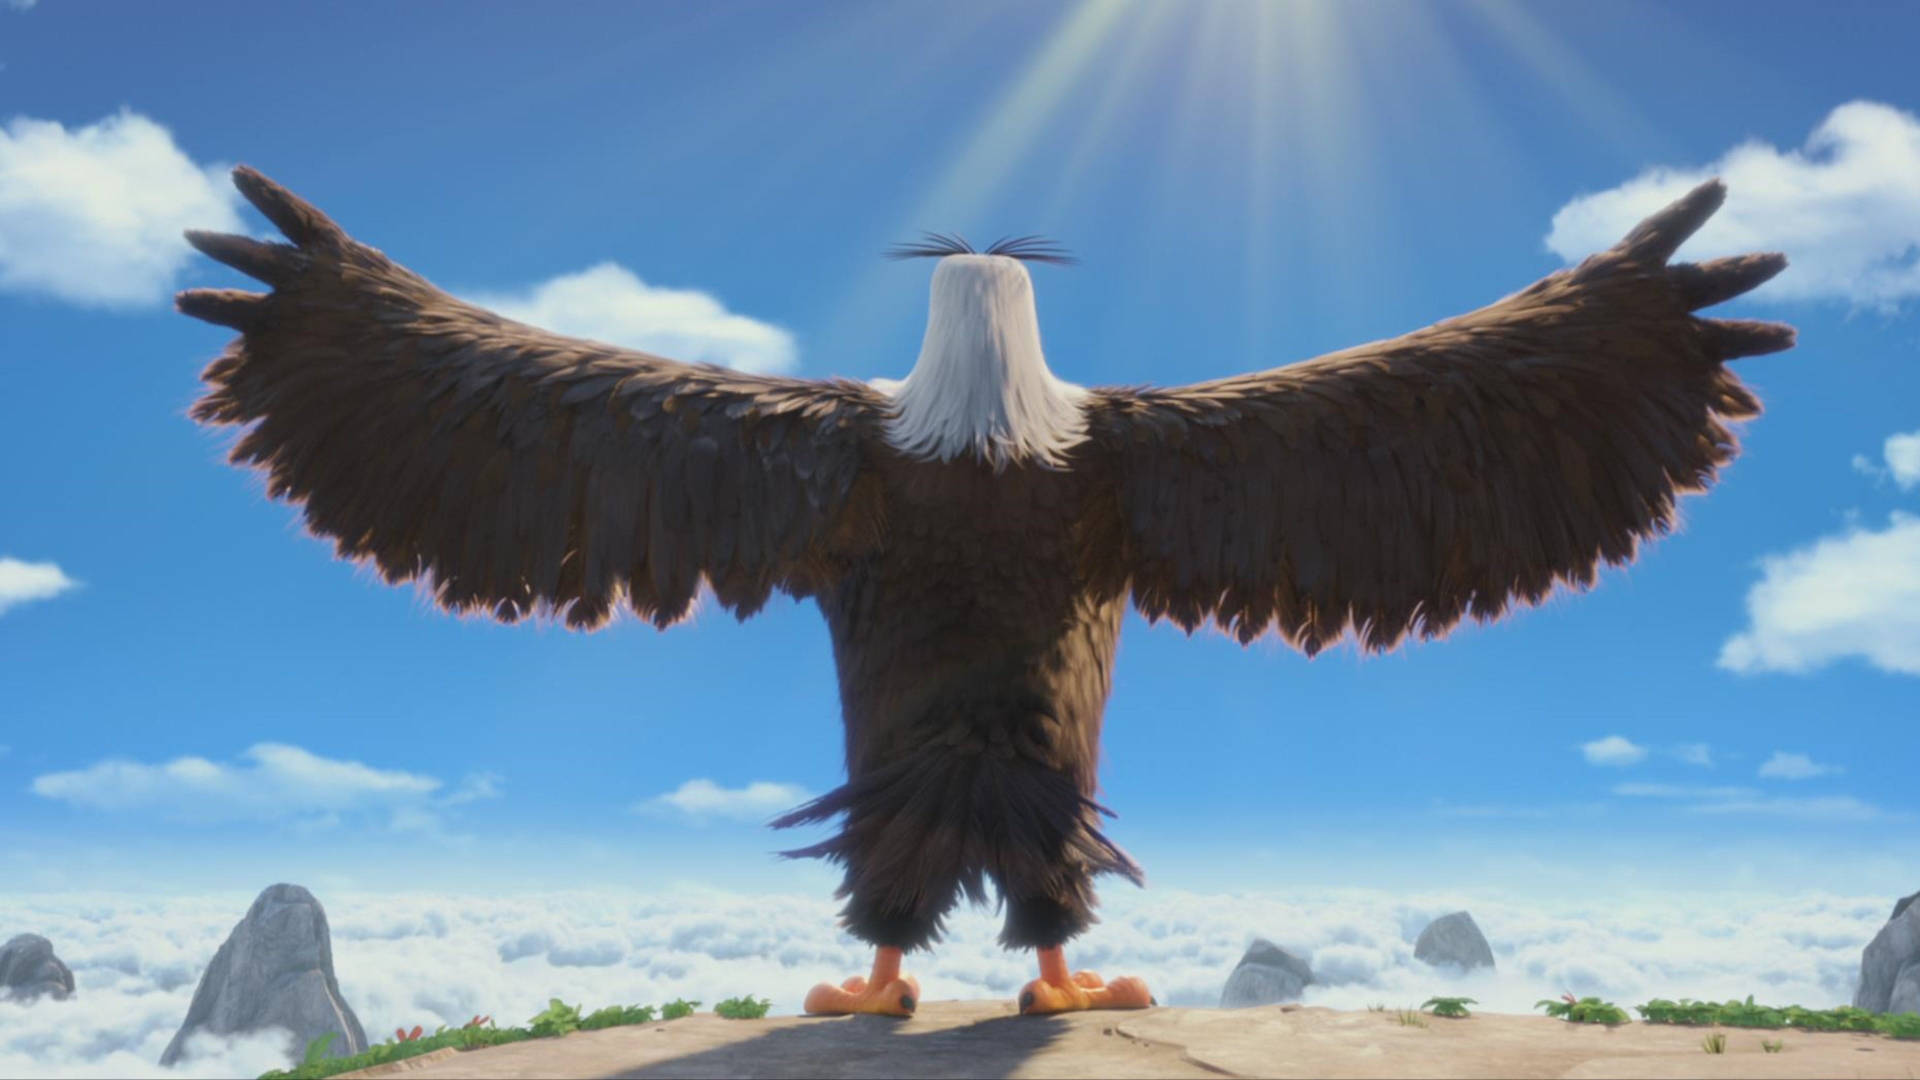 The Mighty Eagle From The Angry Birds Movie Wallpaper